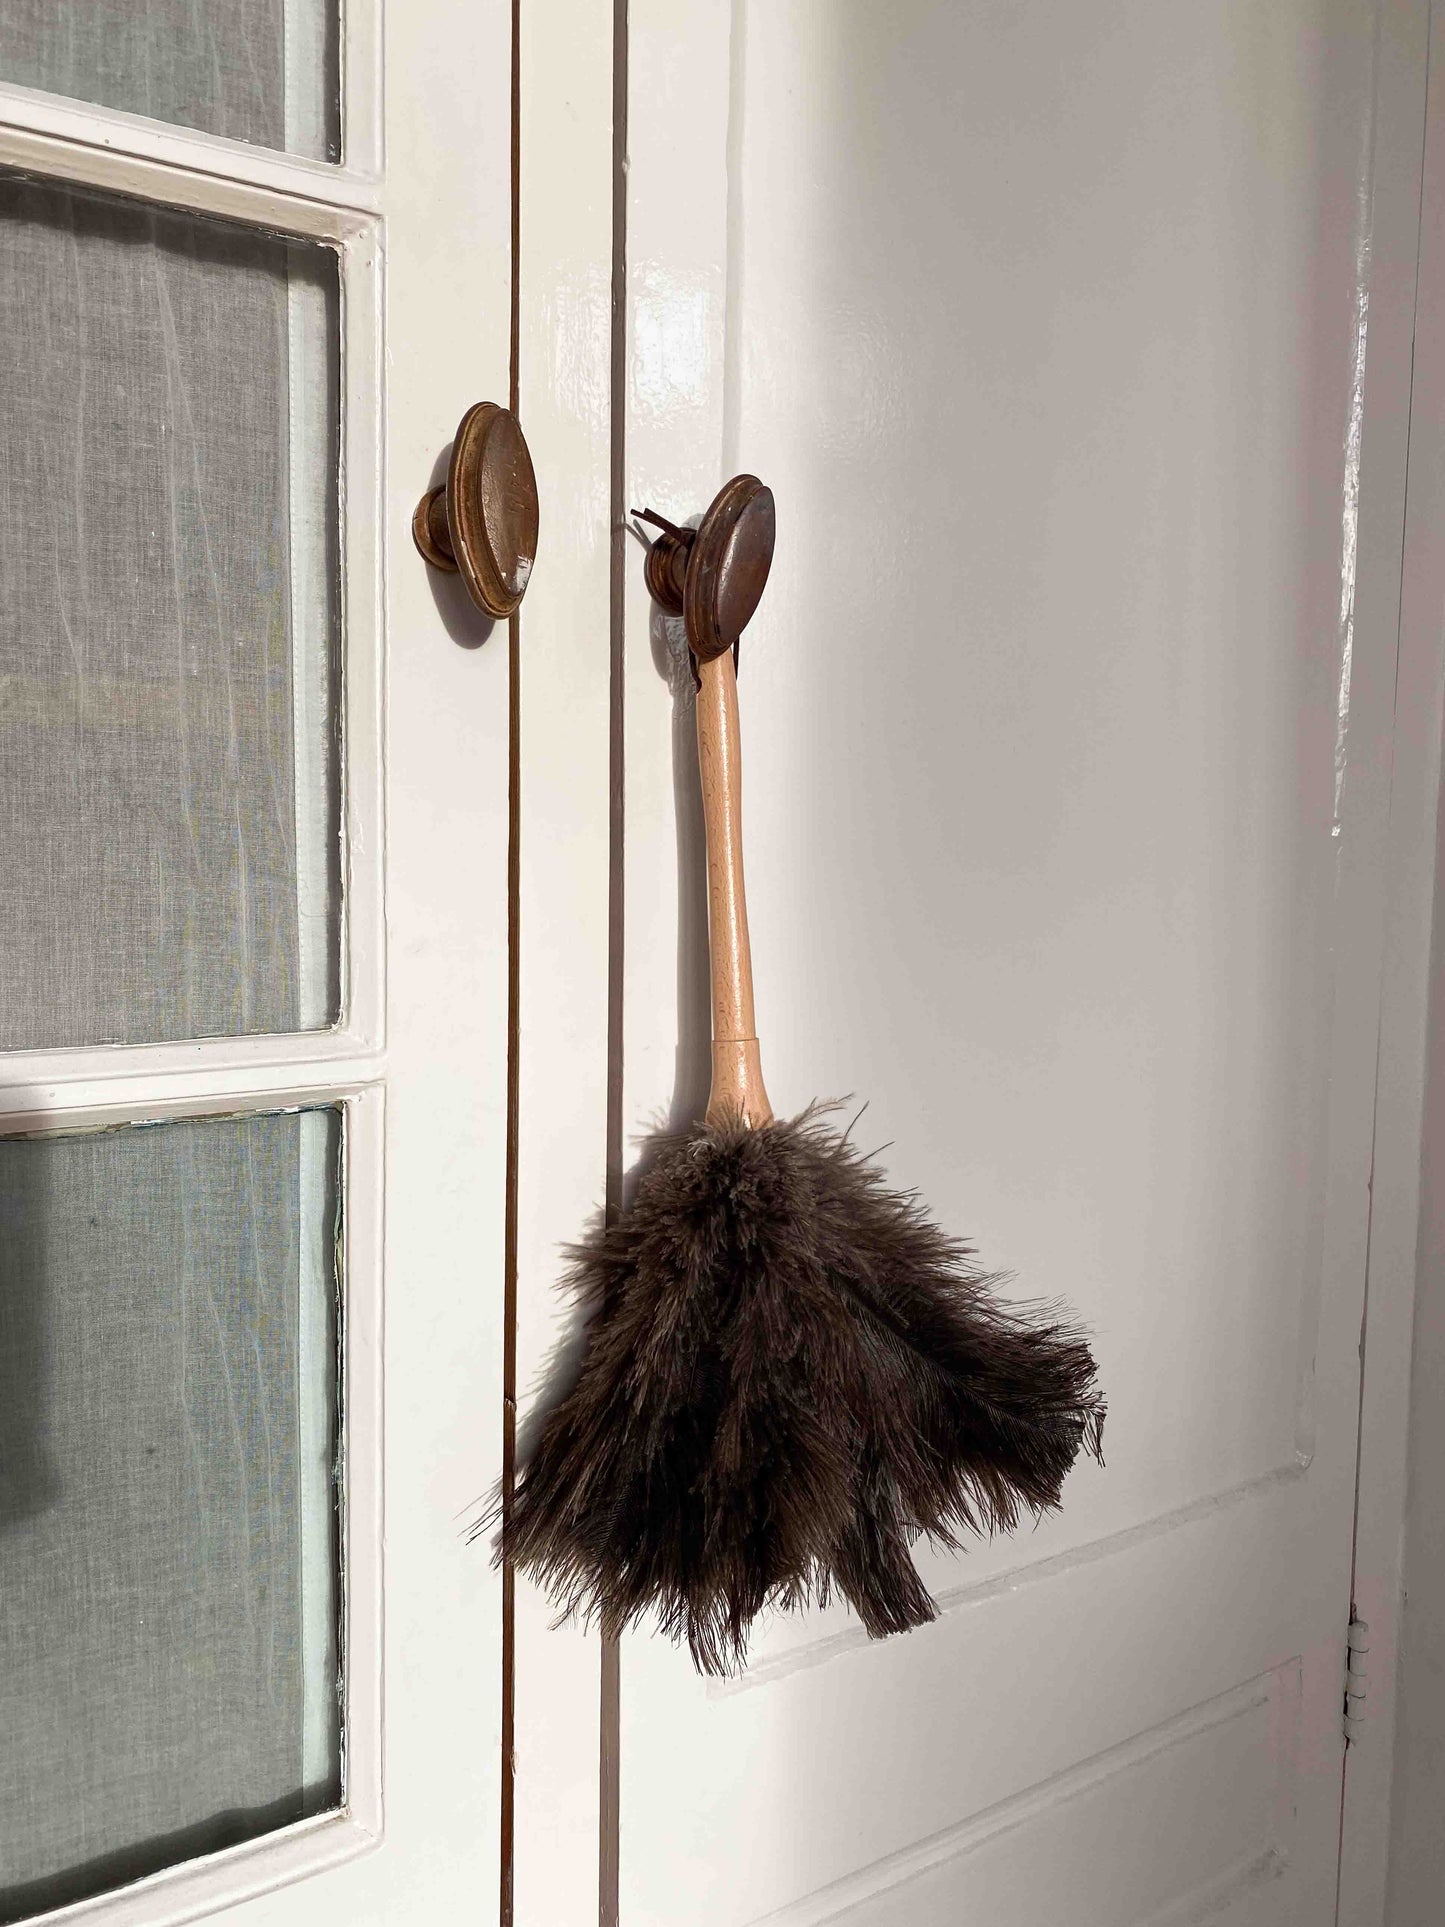 Feather duster ostrich feathers